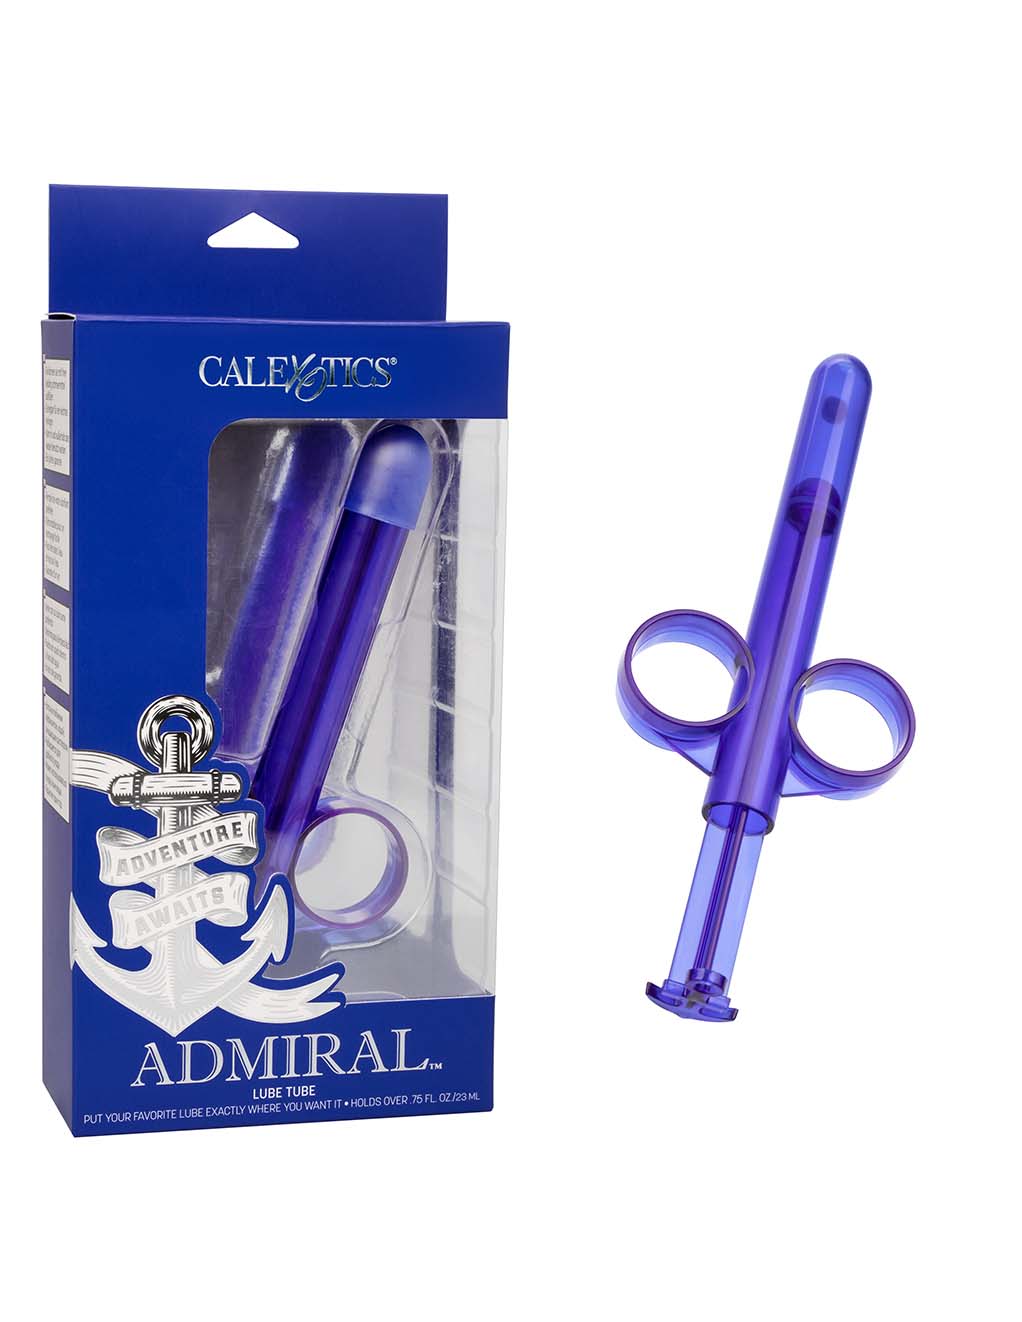 Admiral Lube Tube- with Box